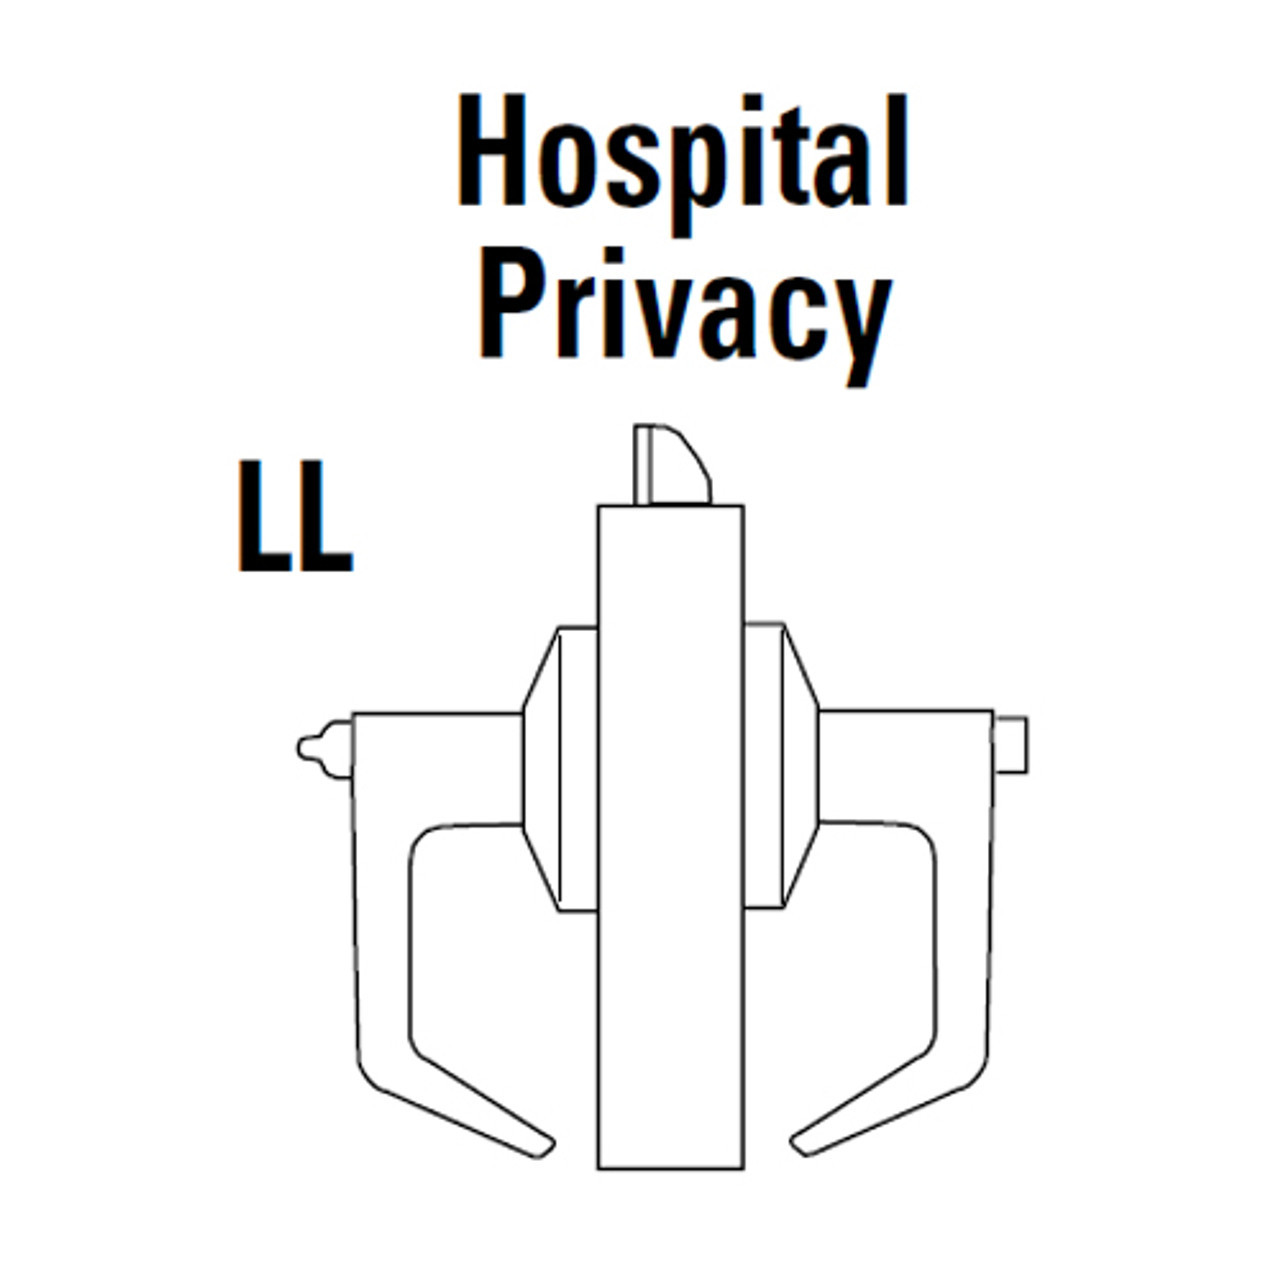 9K30LL15KS3622LM Best 9K Series Hospital Privacy Heavy Duty Cylindrical Lever Locks with Contour Angle with Return Lever Design in Black